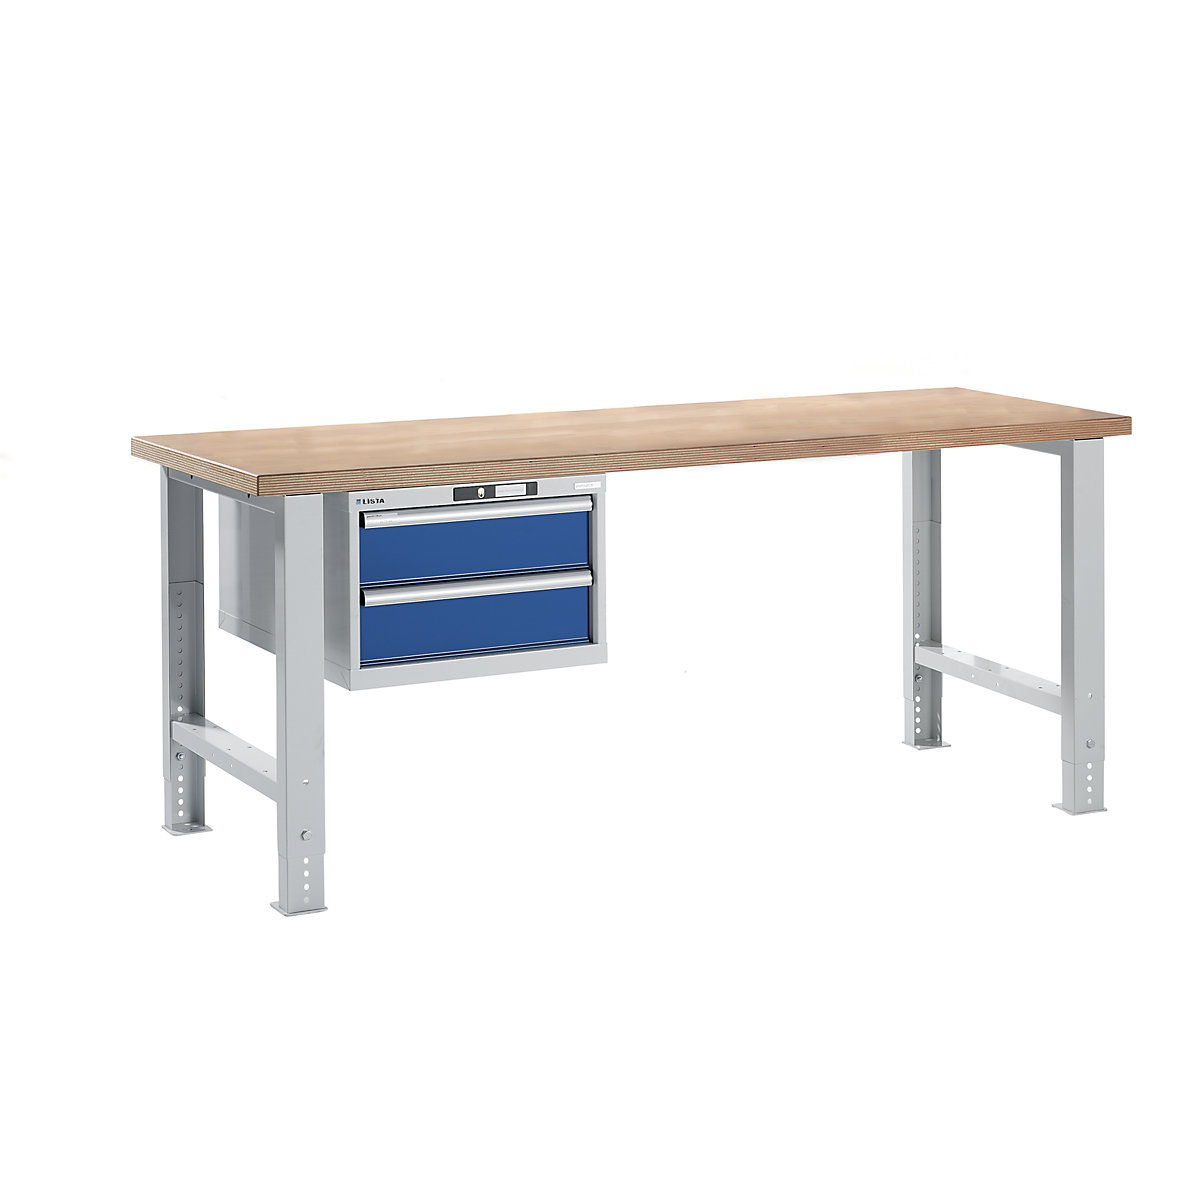 Modular workbench – LISTA, height 740 – 1090 mm, suspended drawer unit, 2 drawers, gentian blue, table width 2000 mm-13